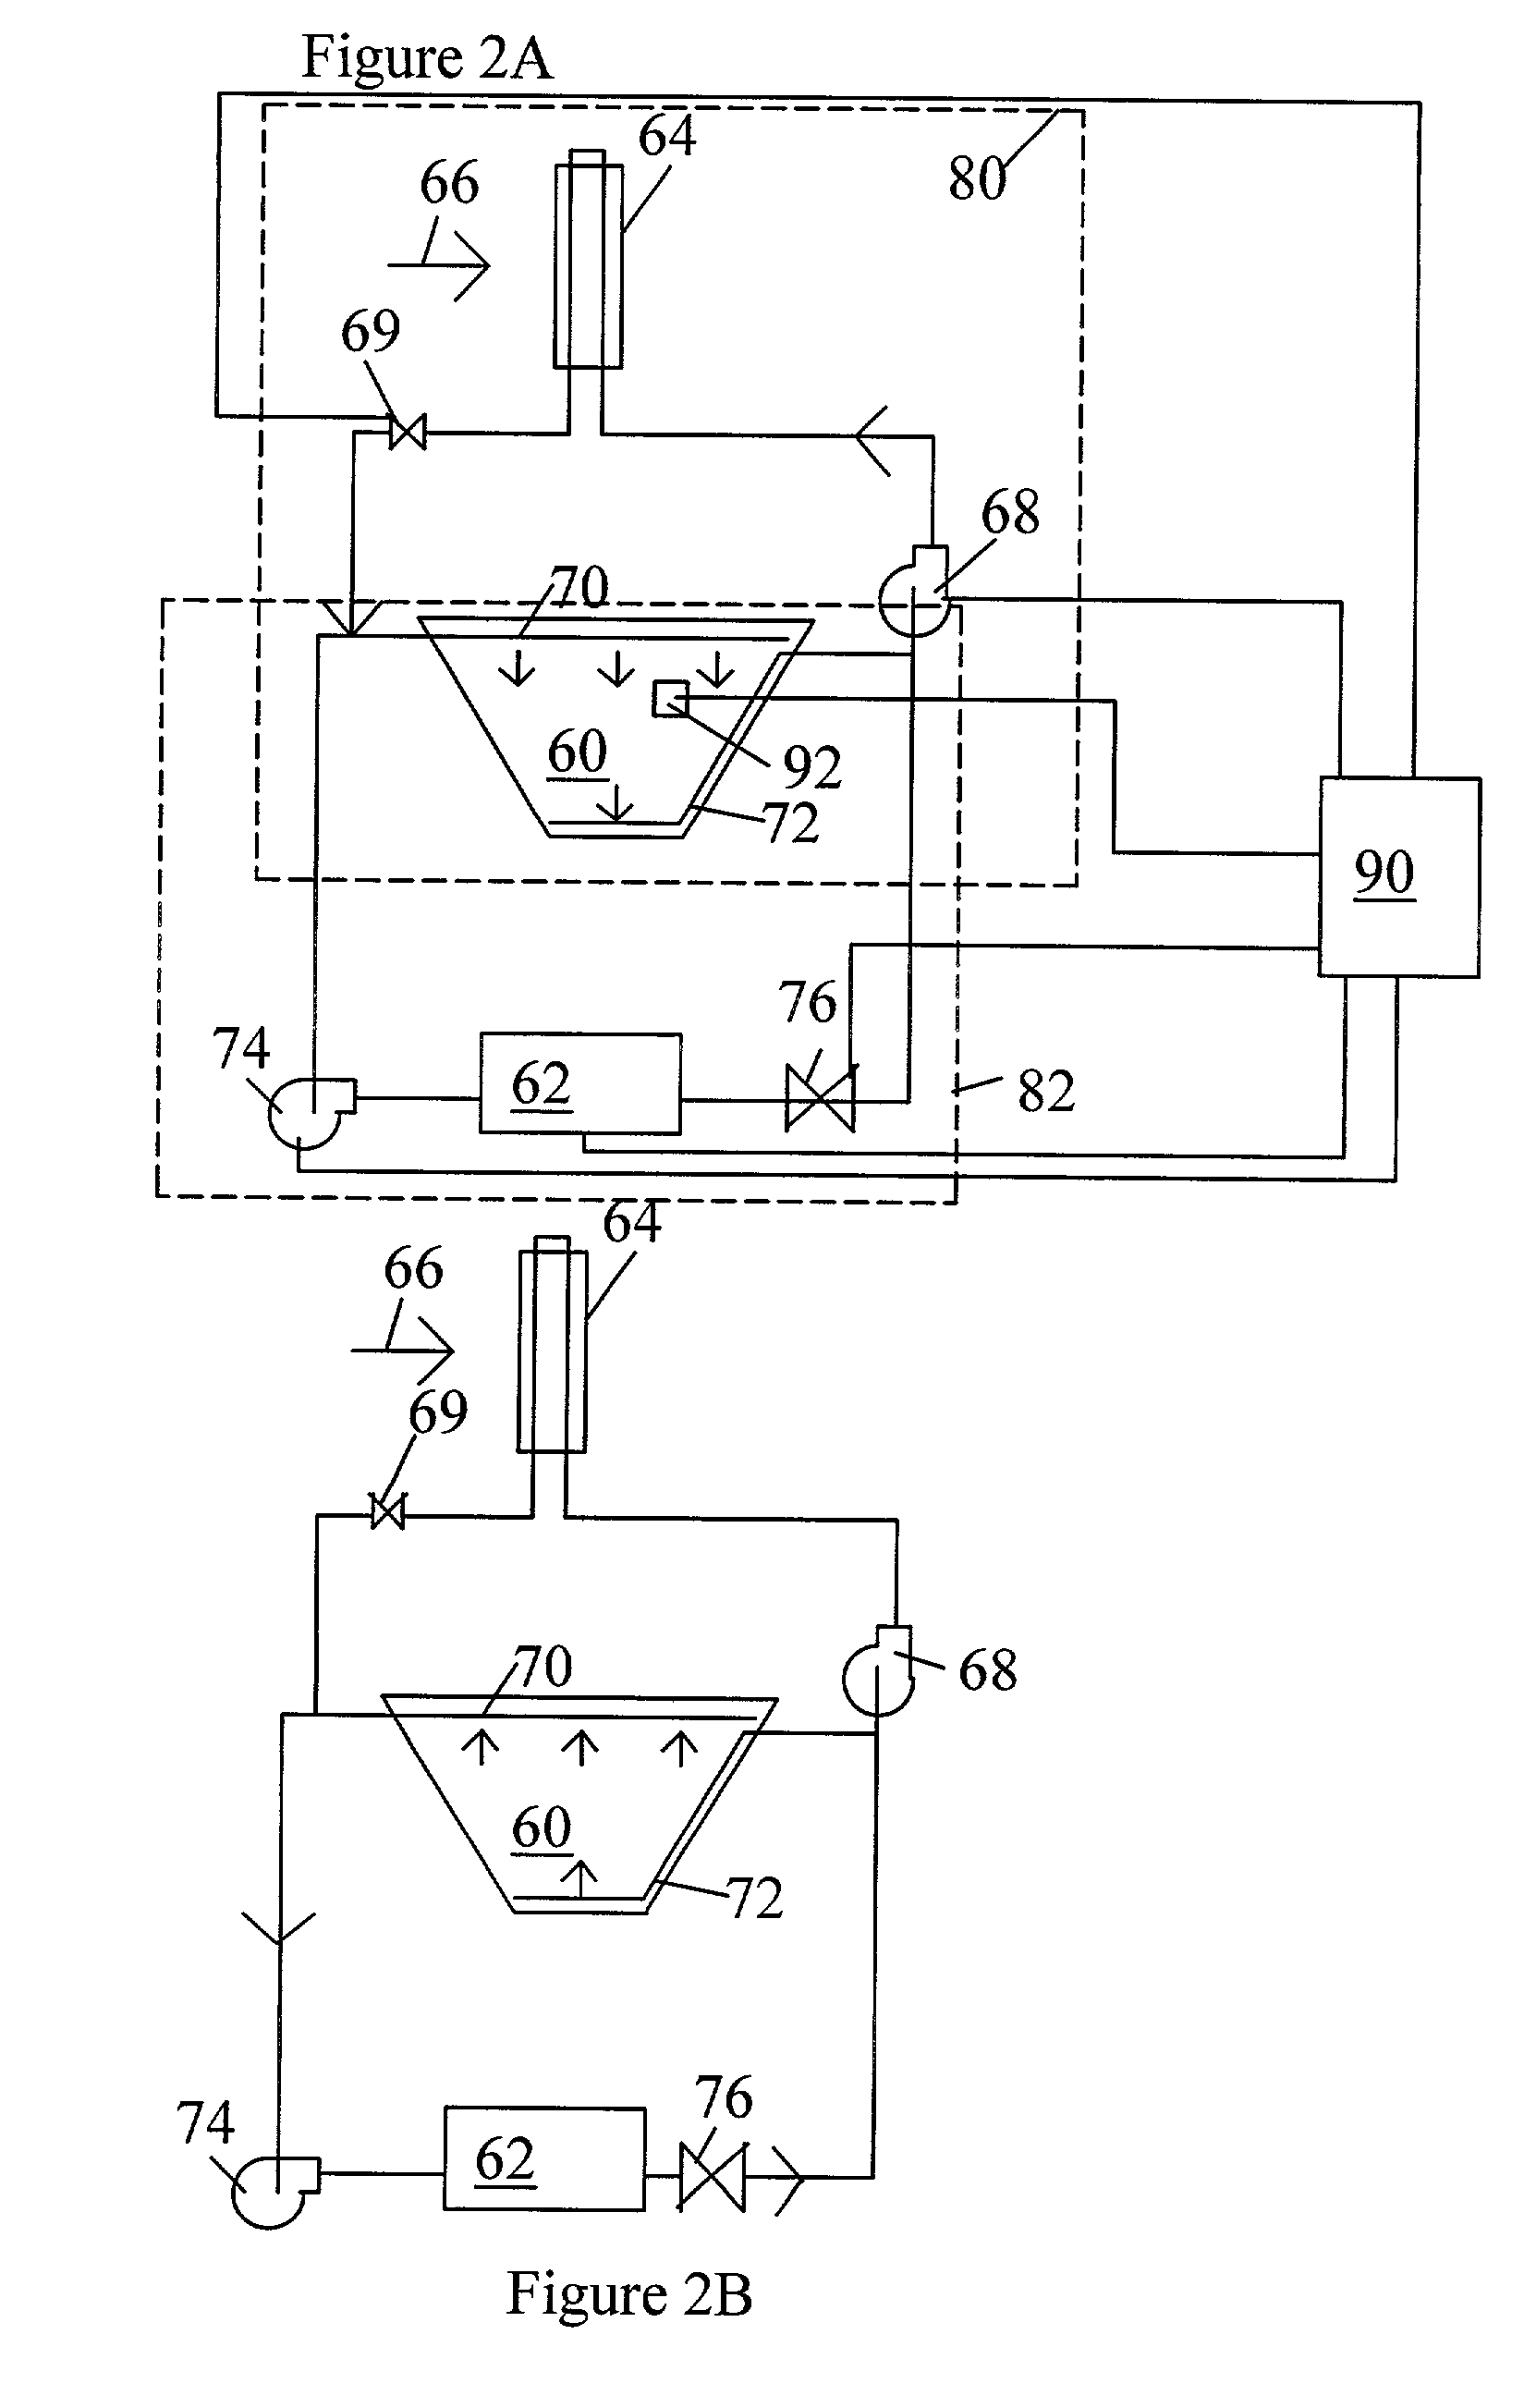 Air-conditioning system with thermal storage